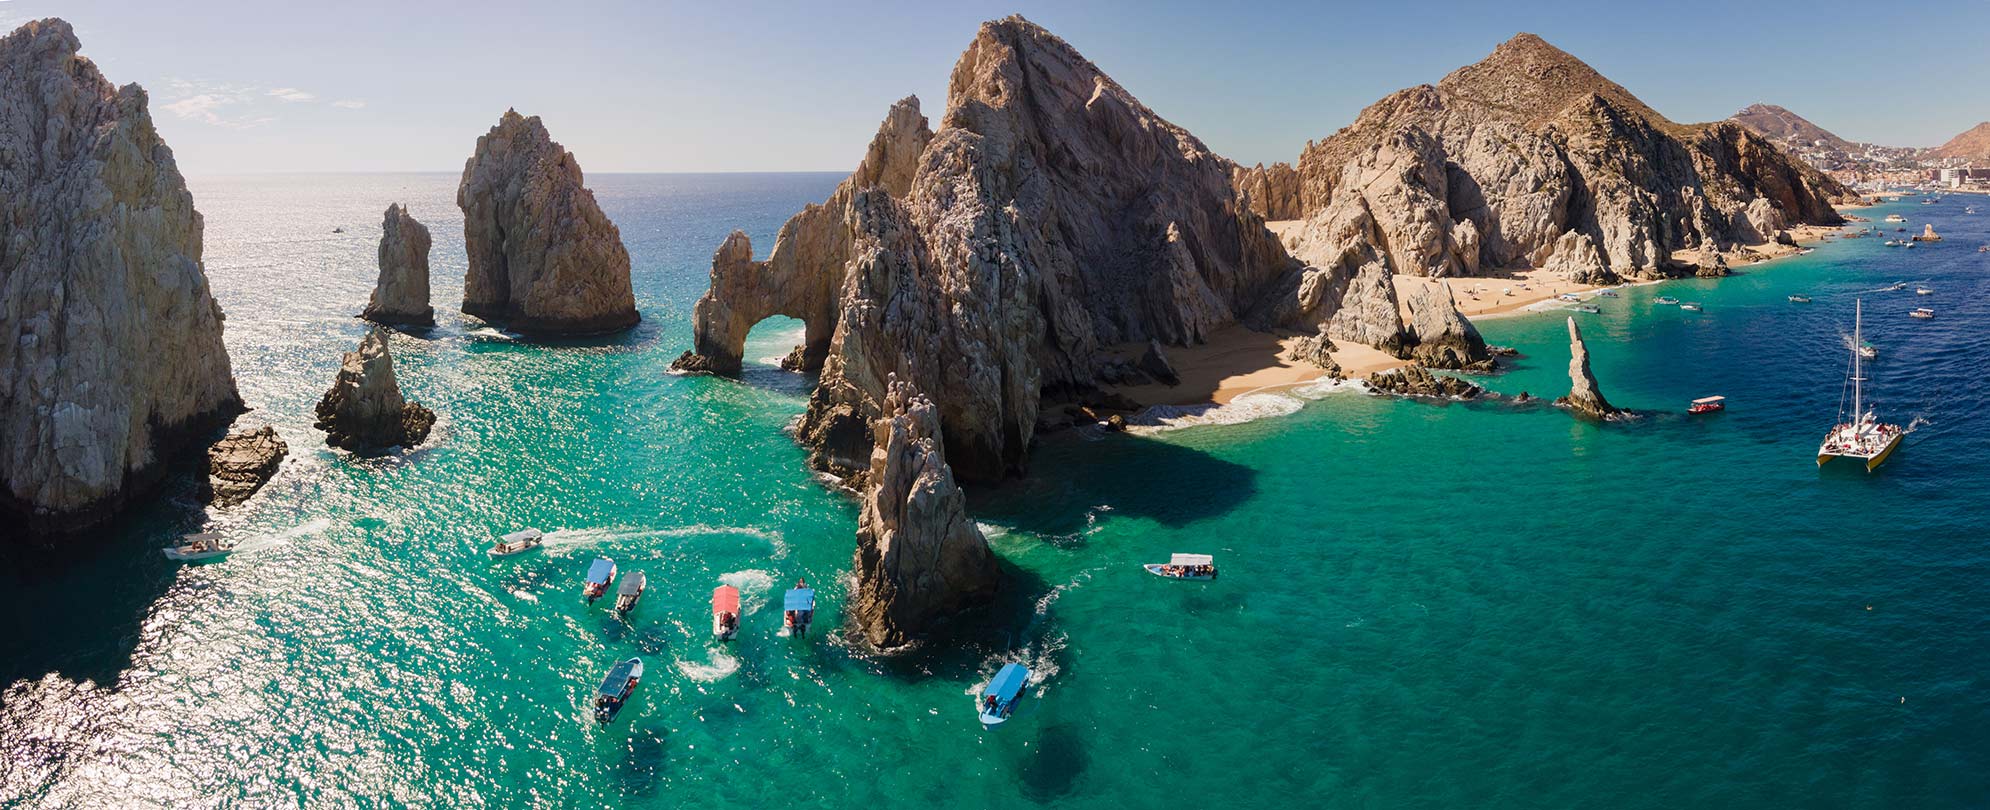 Panoramic view of the Arch of Cabo San Lucas.